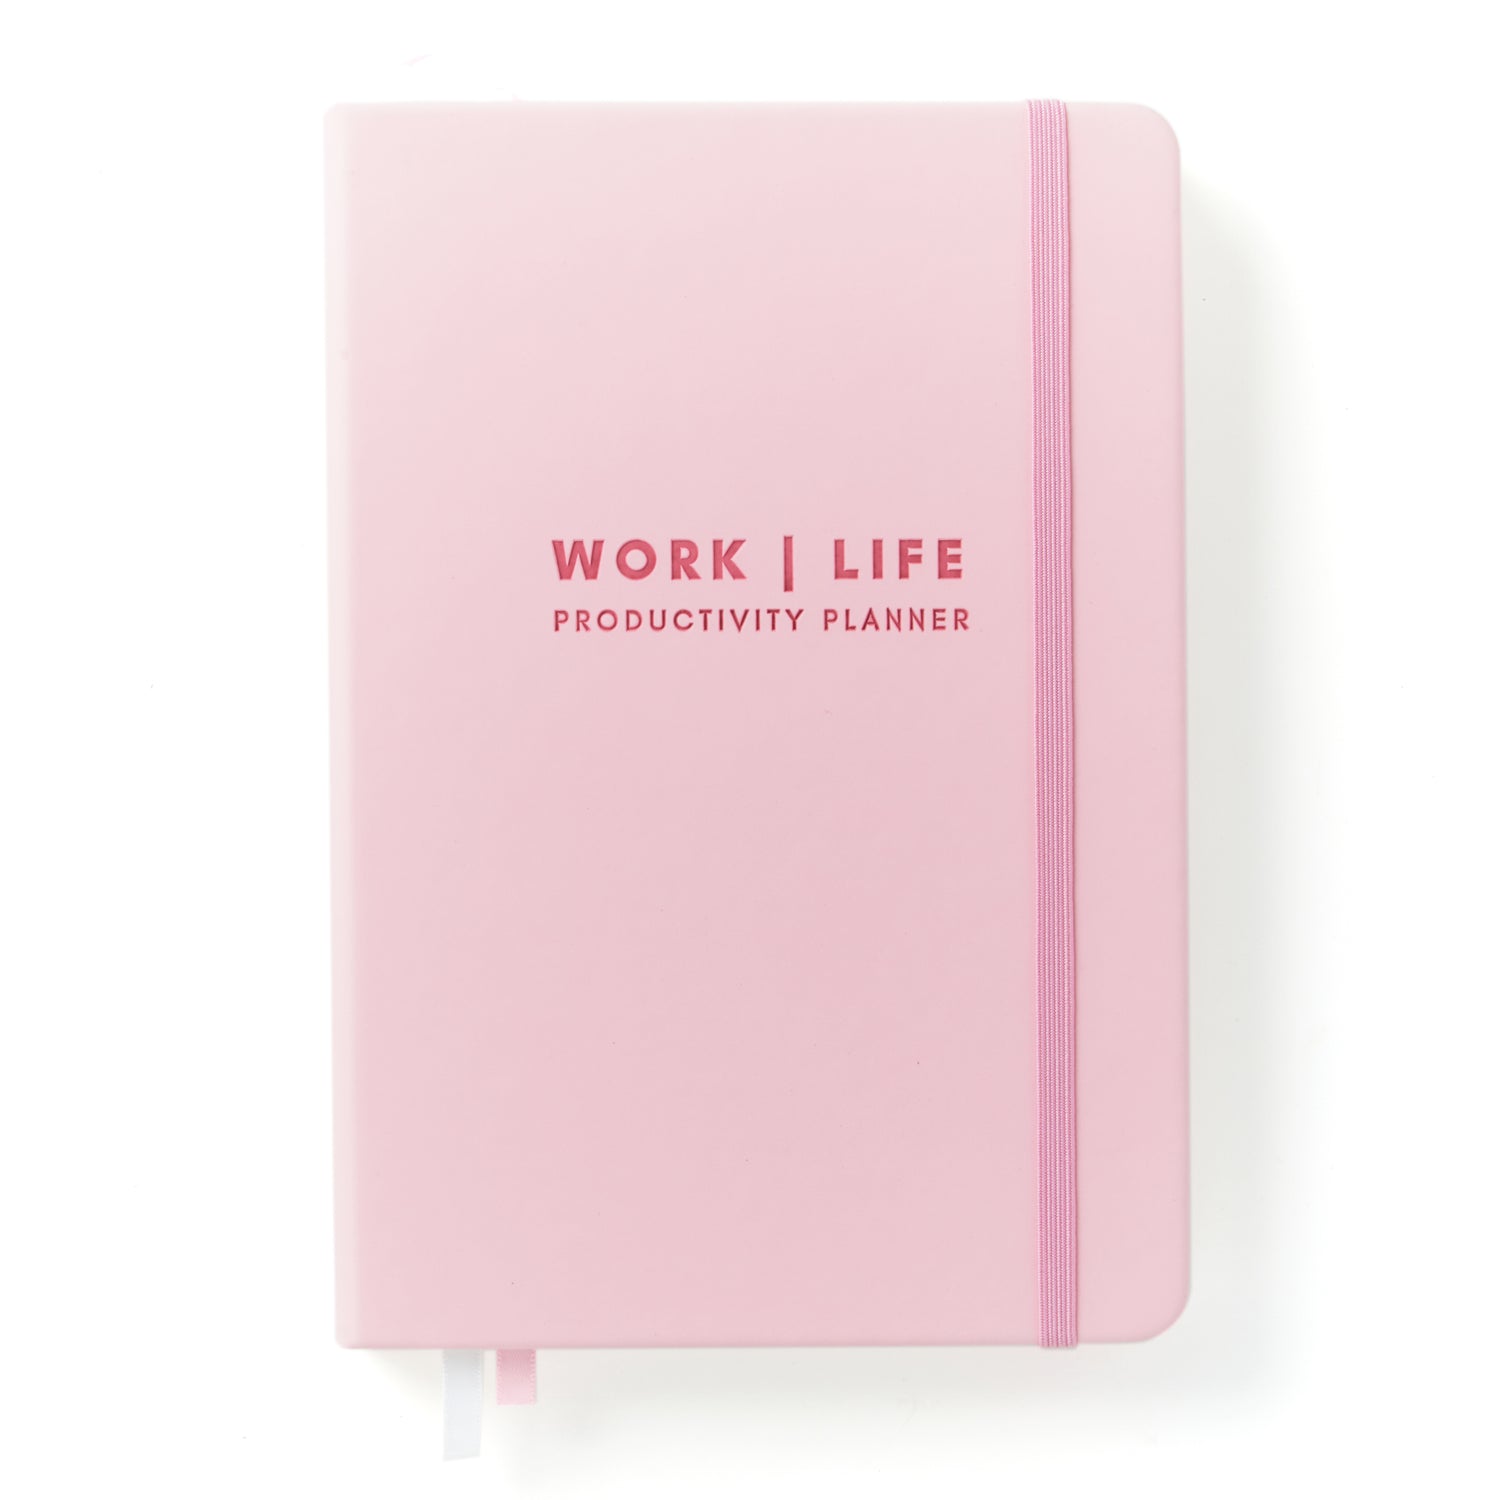 Unleash Your Potential with a Goal-Oriented Productivity Planner